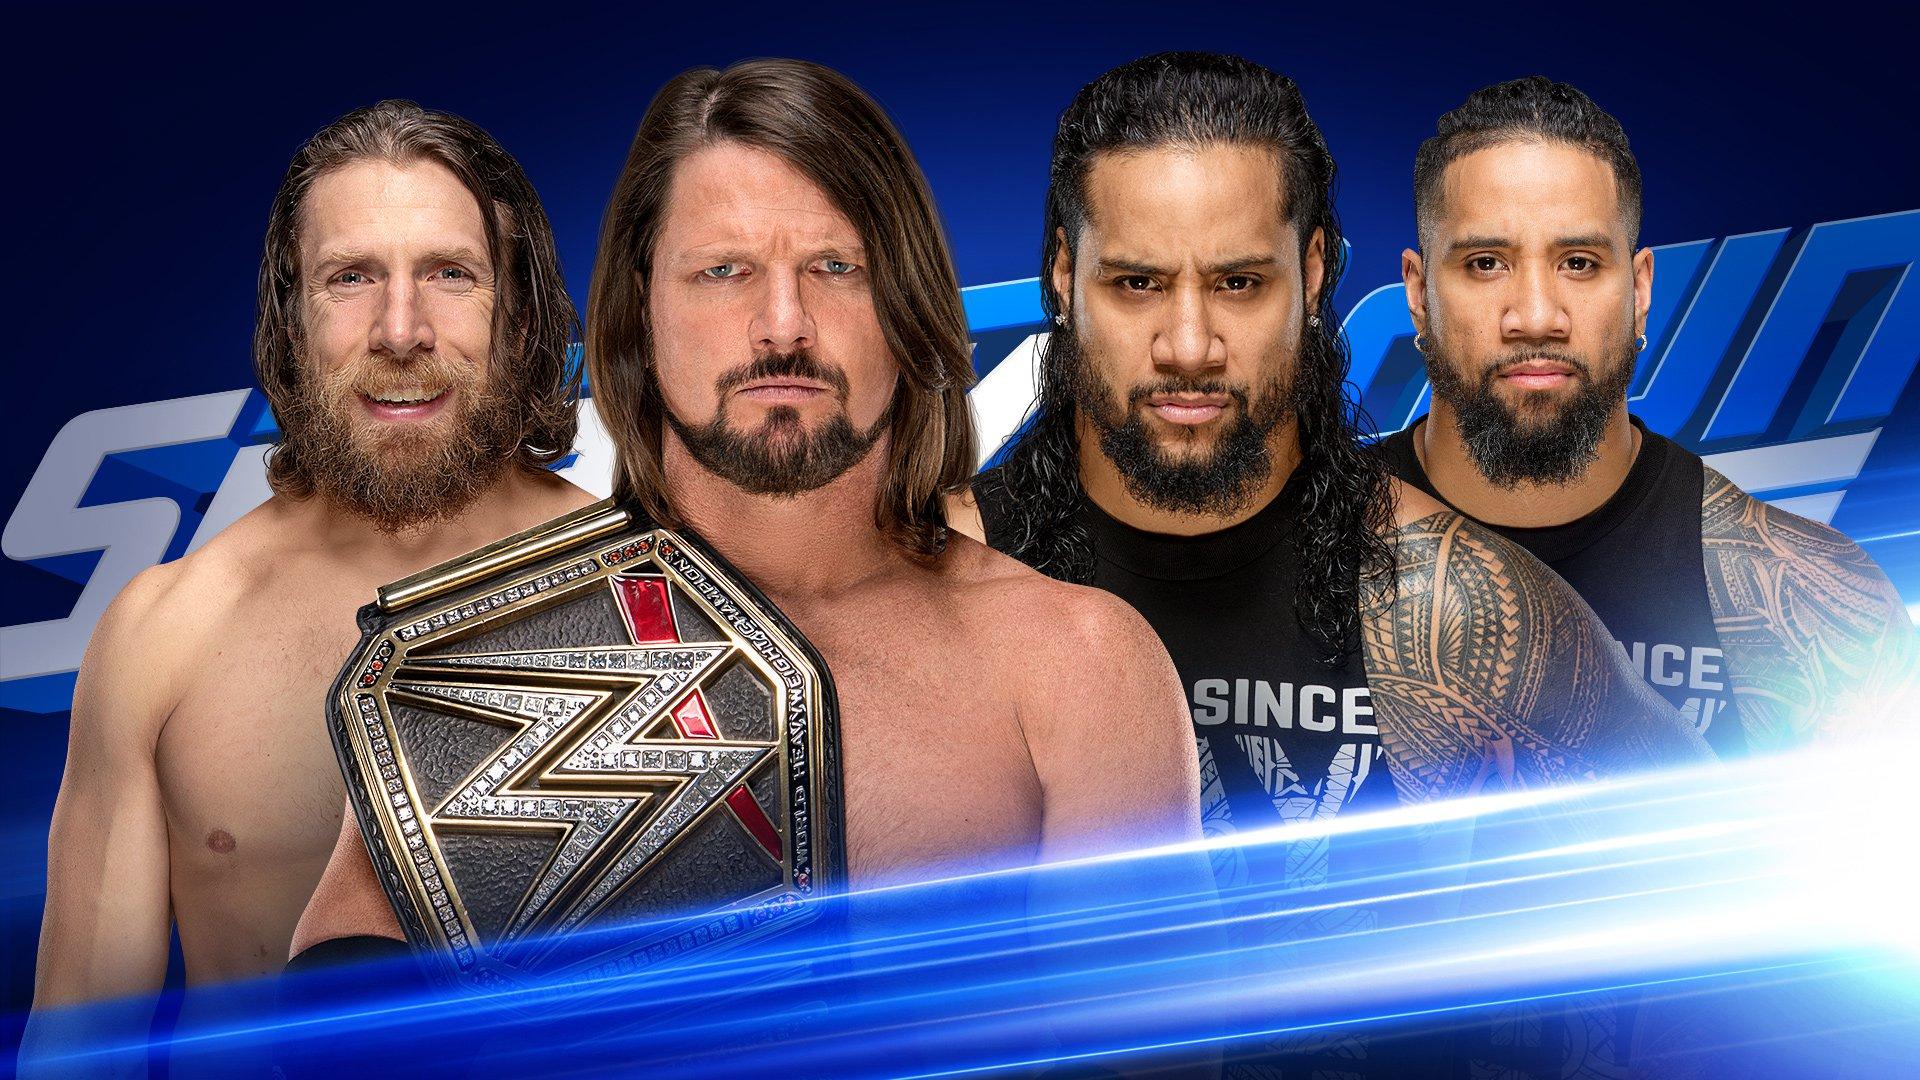 Wwe smackdown на русском. WWE SMACKDOWN. Hipster SMACKDOWN. Rematch. Чем отличается SMACKDOWN от Raw.